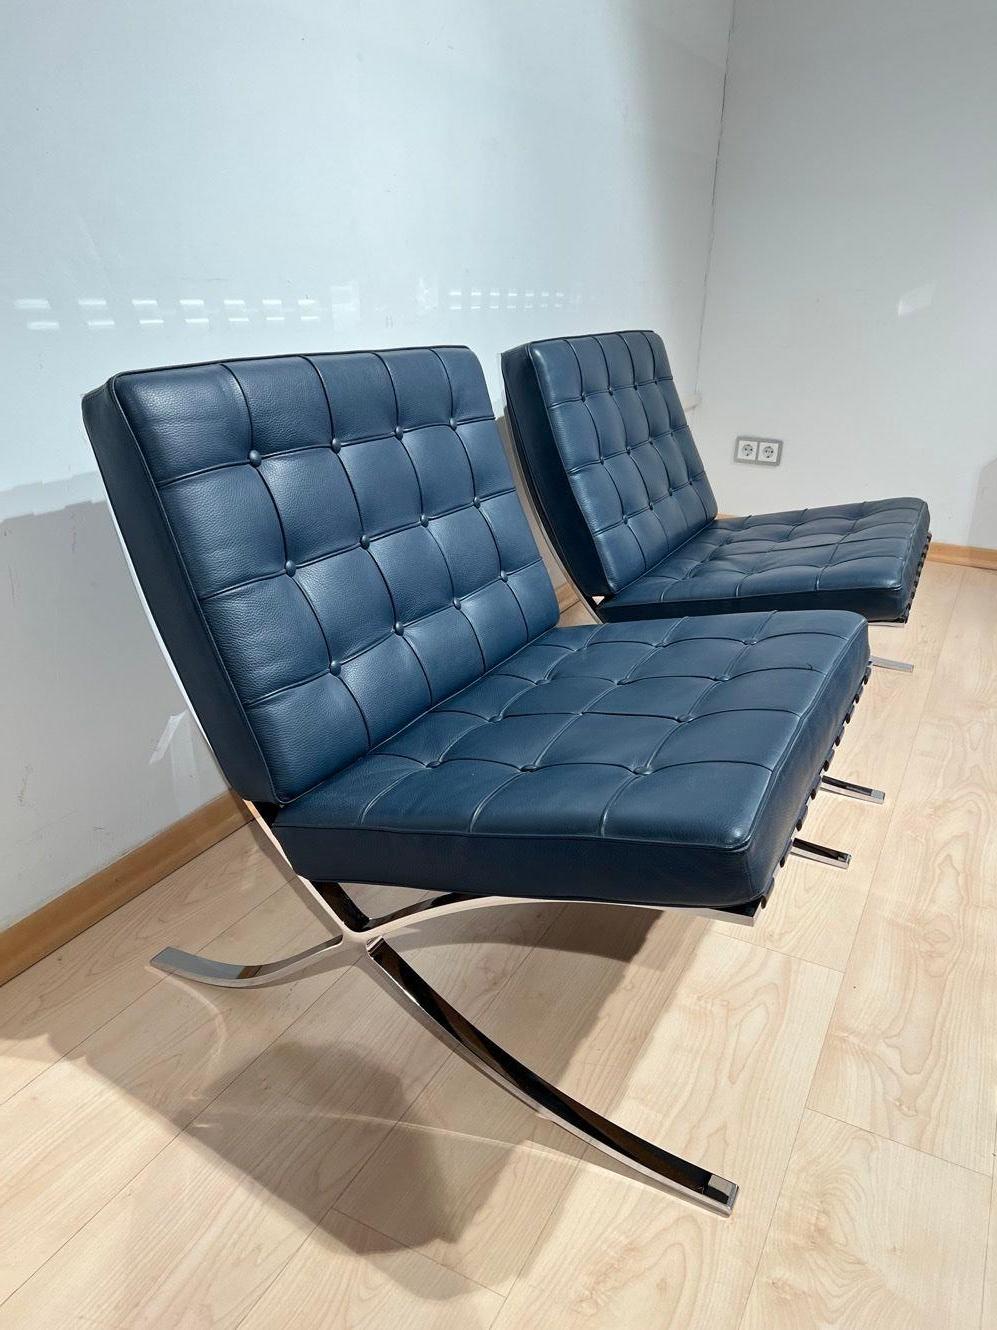 Late 20th Century Pair of 1970s Barcelona Lounge Chairs by Mies van der Rohe in Blue Leather